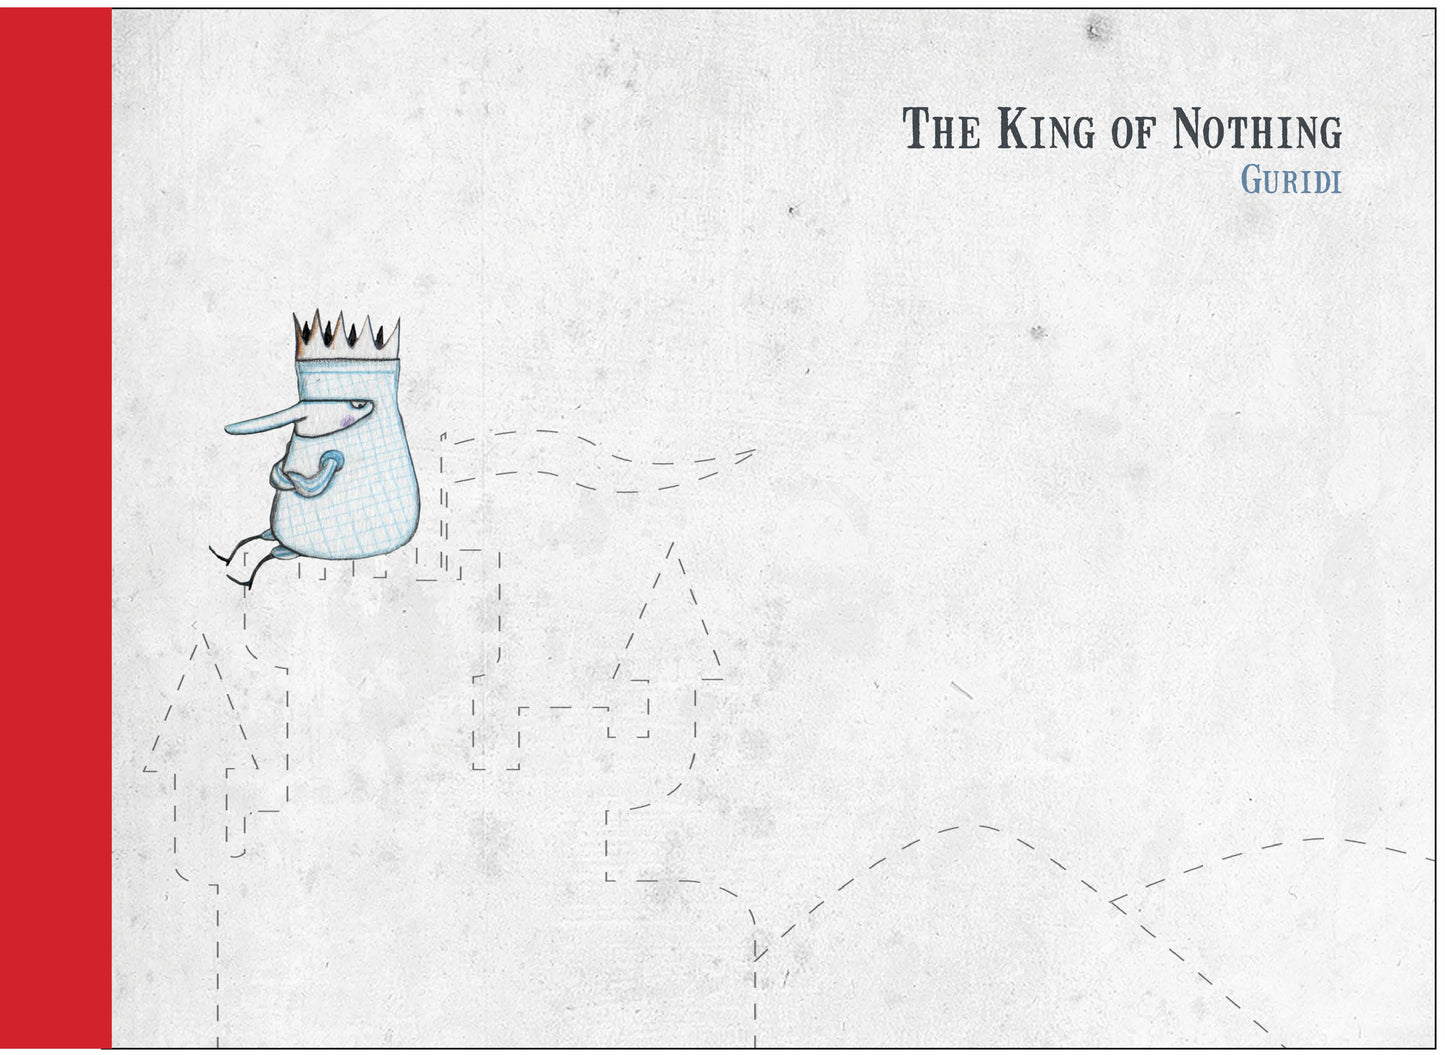 The King of Nothing